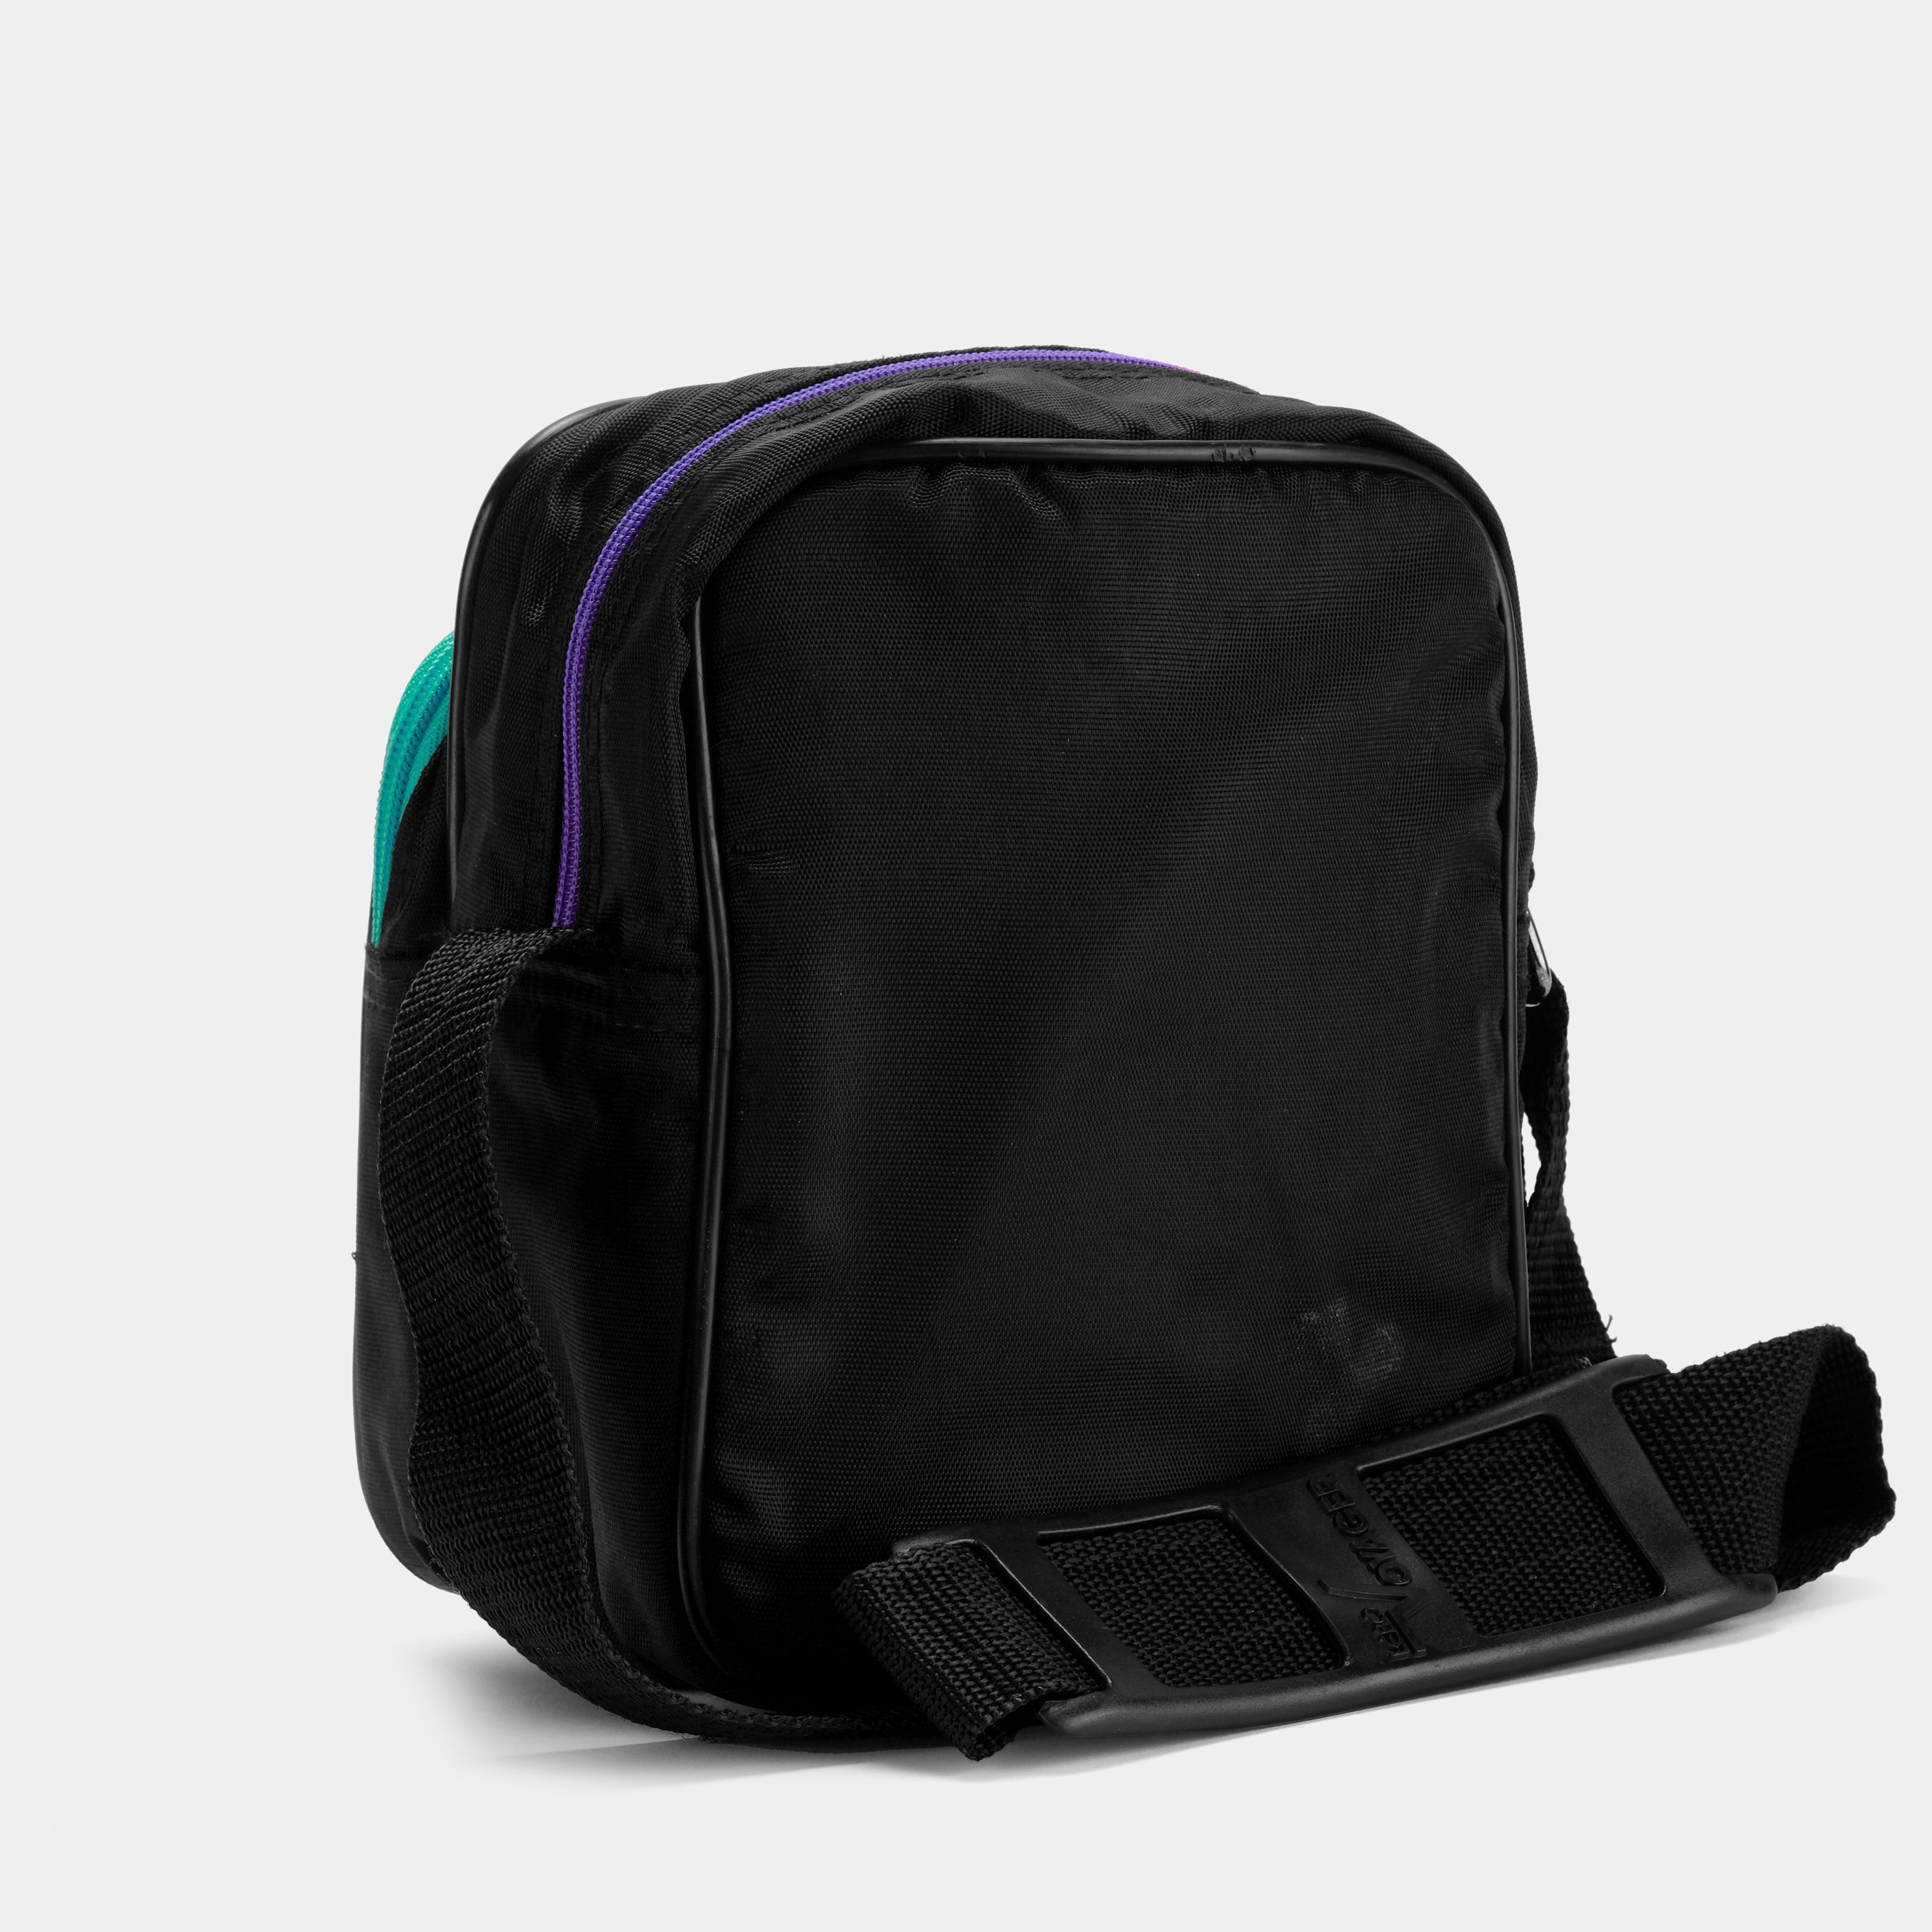 Lebo Voyager Black with Turquoise and Purple Stripes Camera Bag